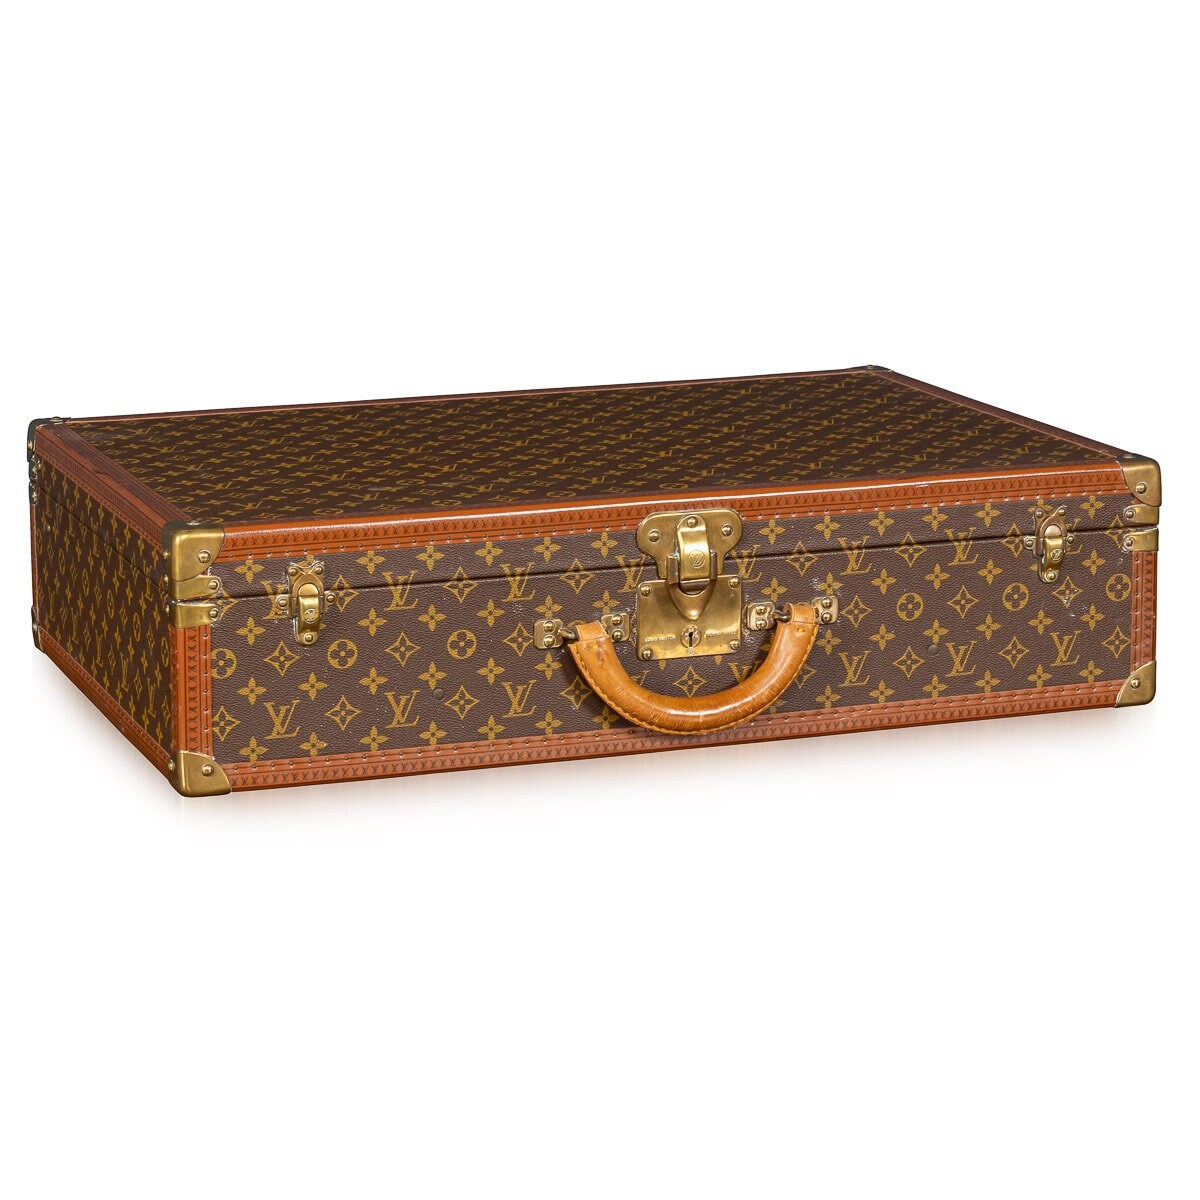 Louis VUITTON Small suitcase in Monogram canvas, and na…